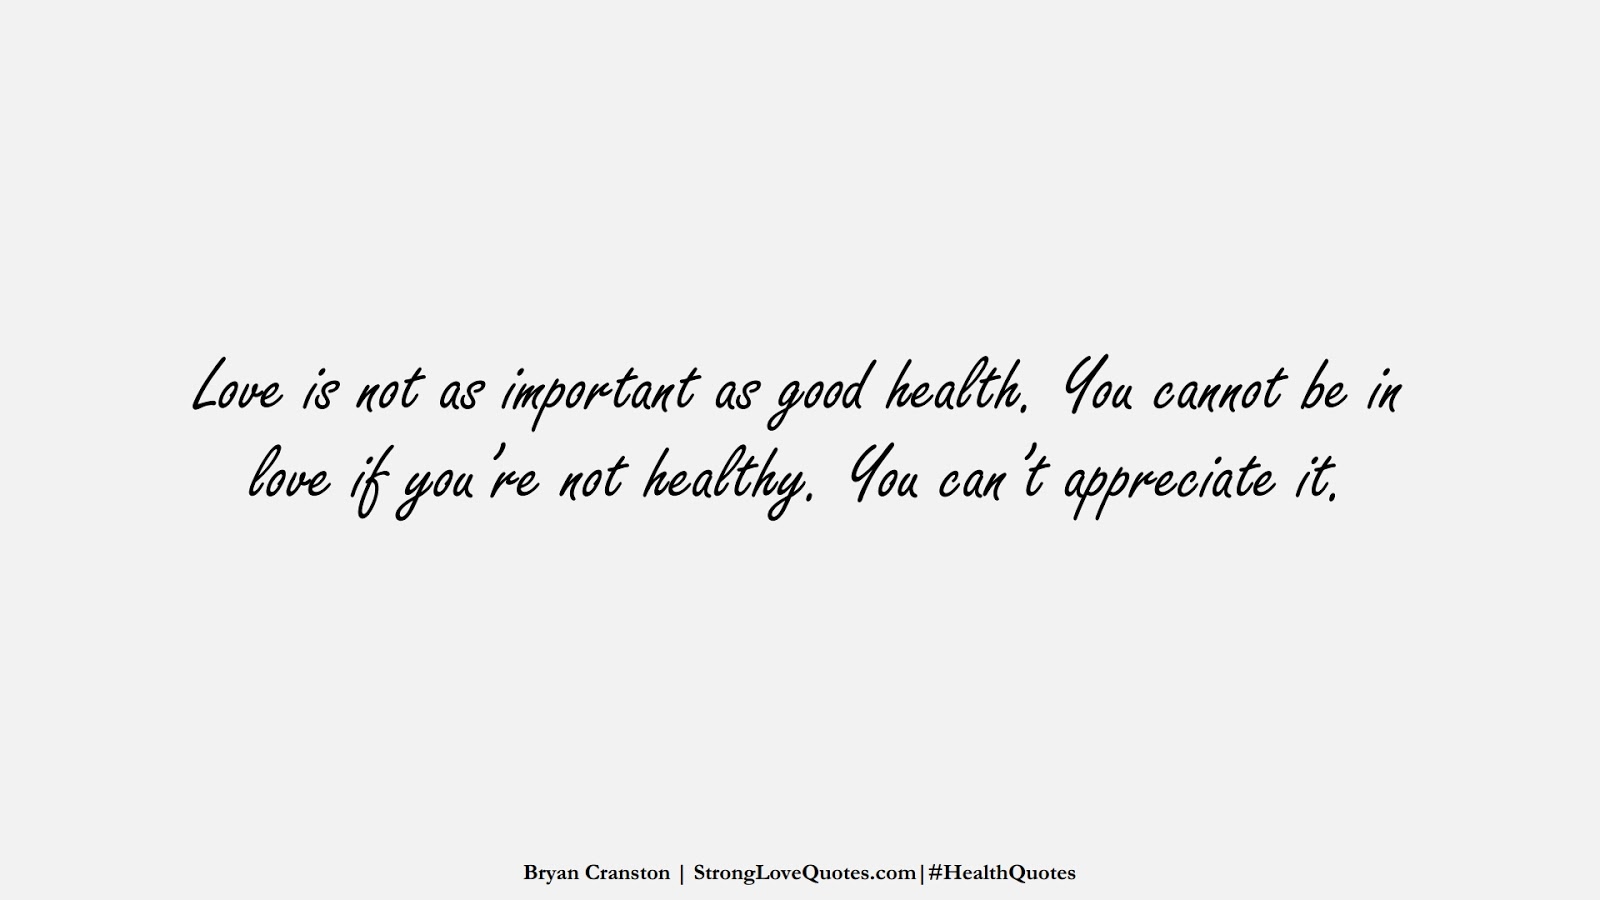 Love is not as important as good health. You cannot be in love if you’re not healthy. You can’t appreciate it. (Bryan Cranston);  #HealthQuotes